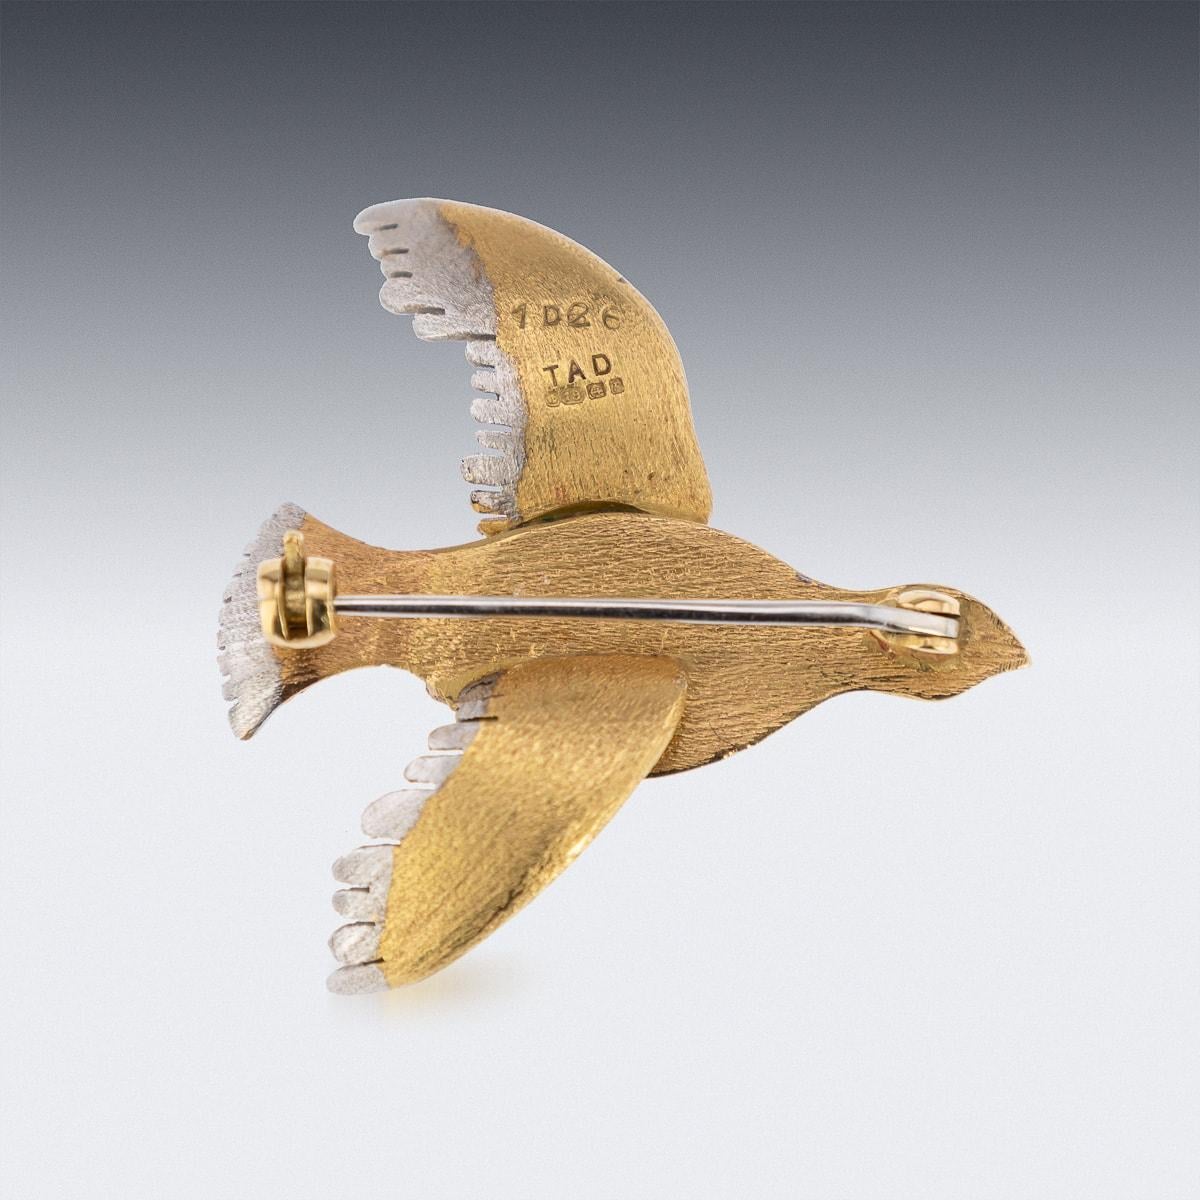 Vintage 20th Century British 18k three-colour gold brooch, realistically modelled as a grouse in flight, the eyes are set with small emerald. Hallmarked English 18k gold (750 standard), Birmingham, year 1964 (P), Maker T.A.D.

CONDITION
In Great